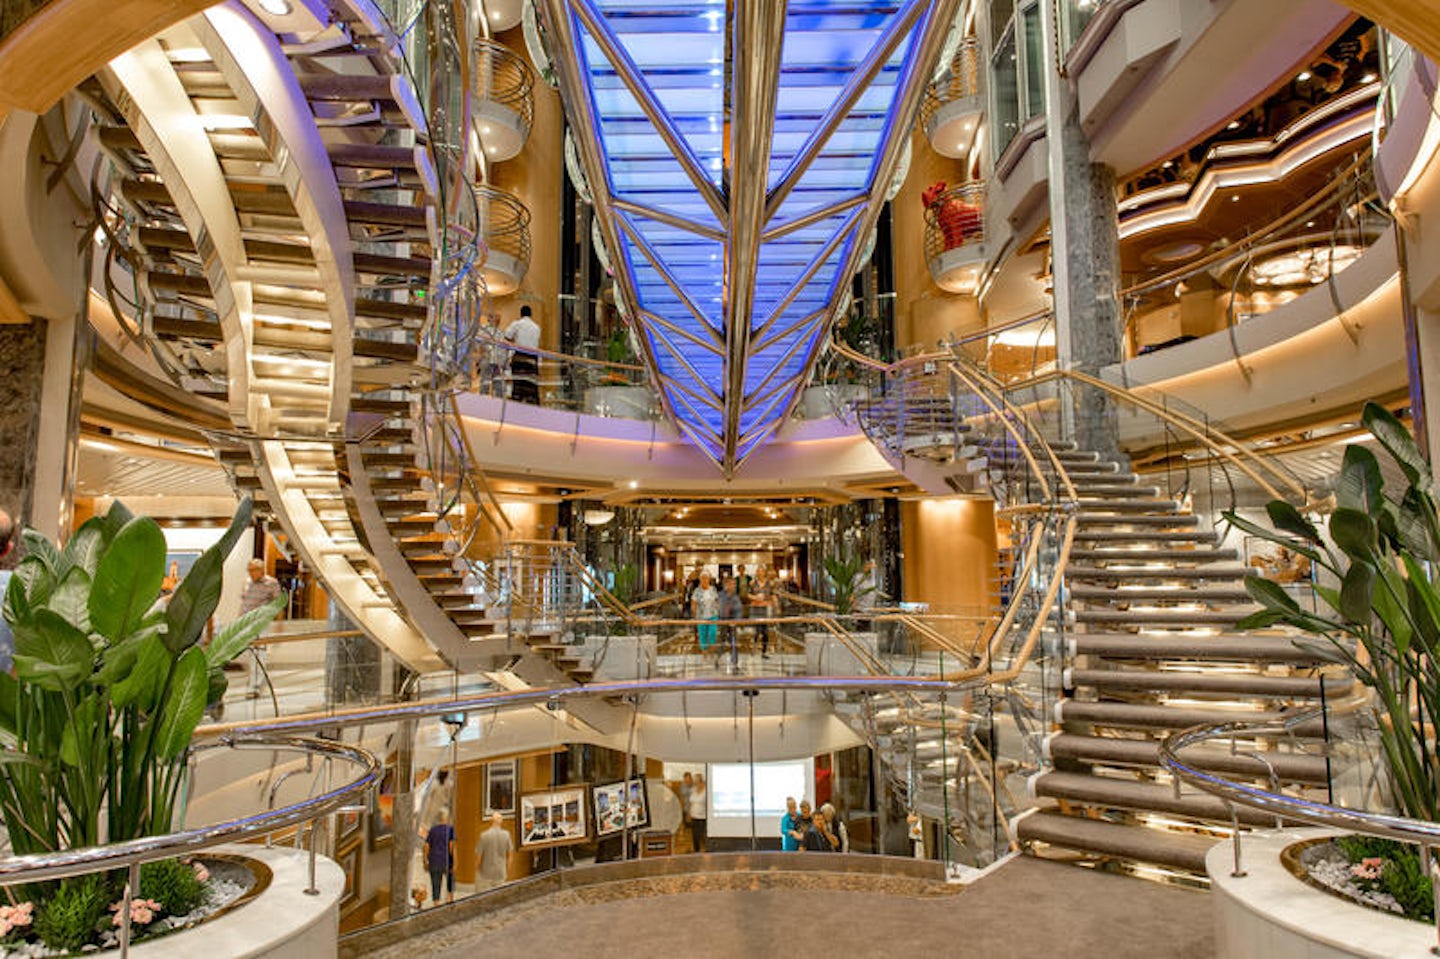 Centrum on Independence of the Seas